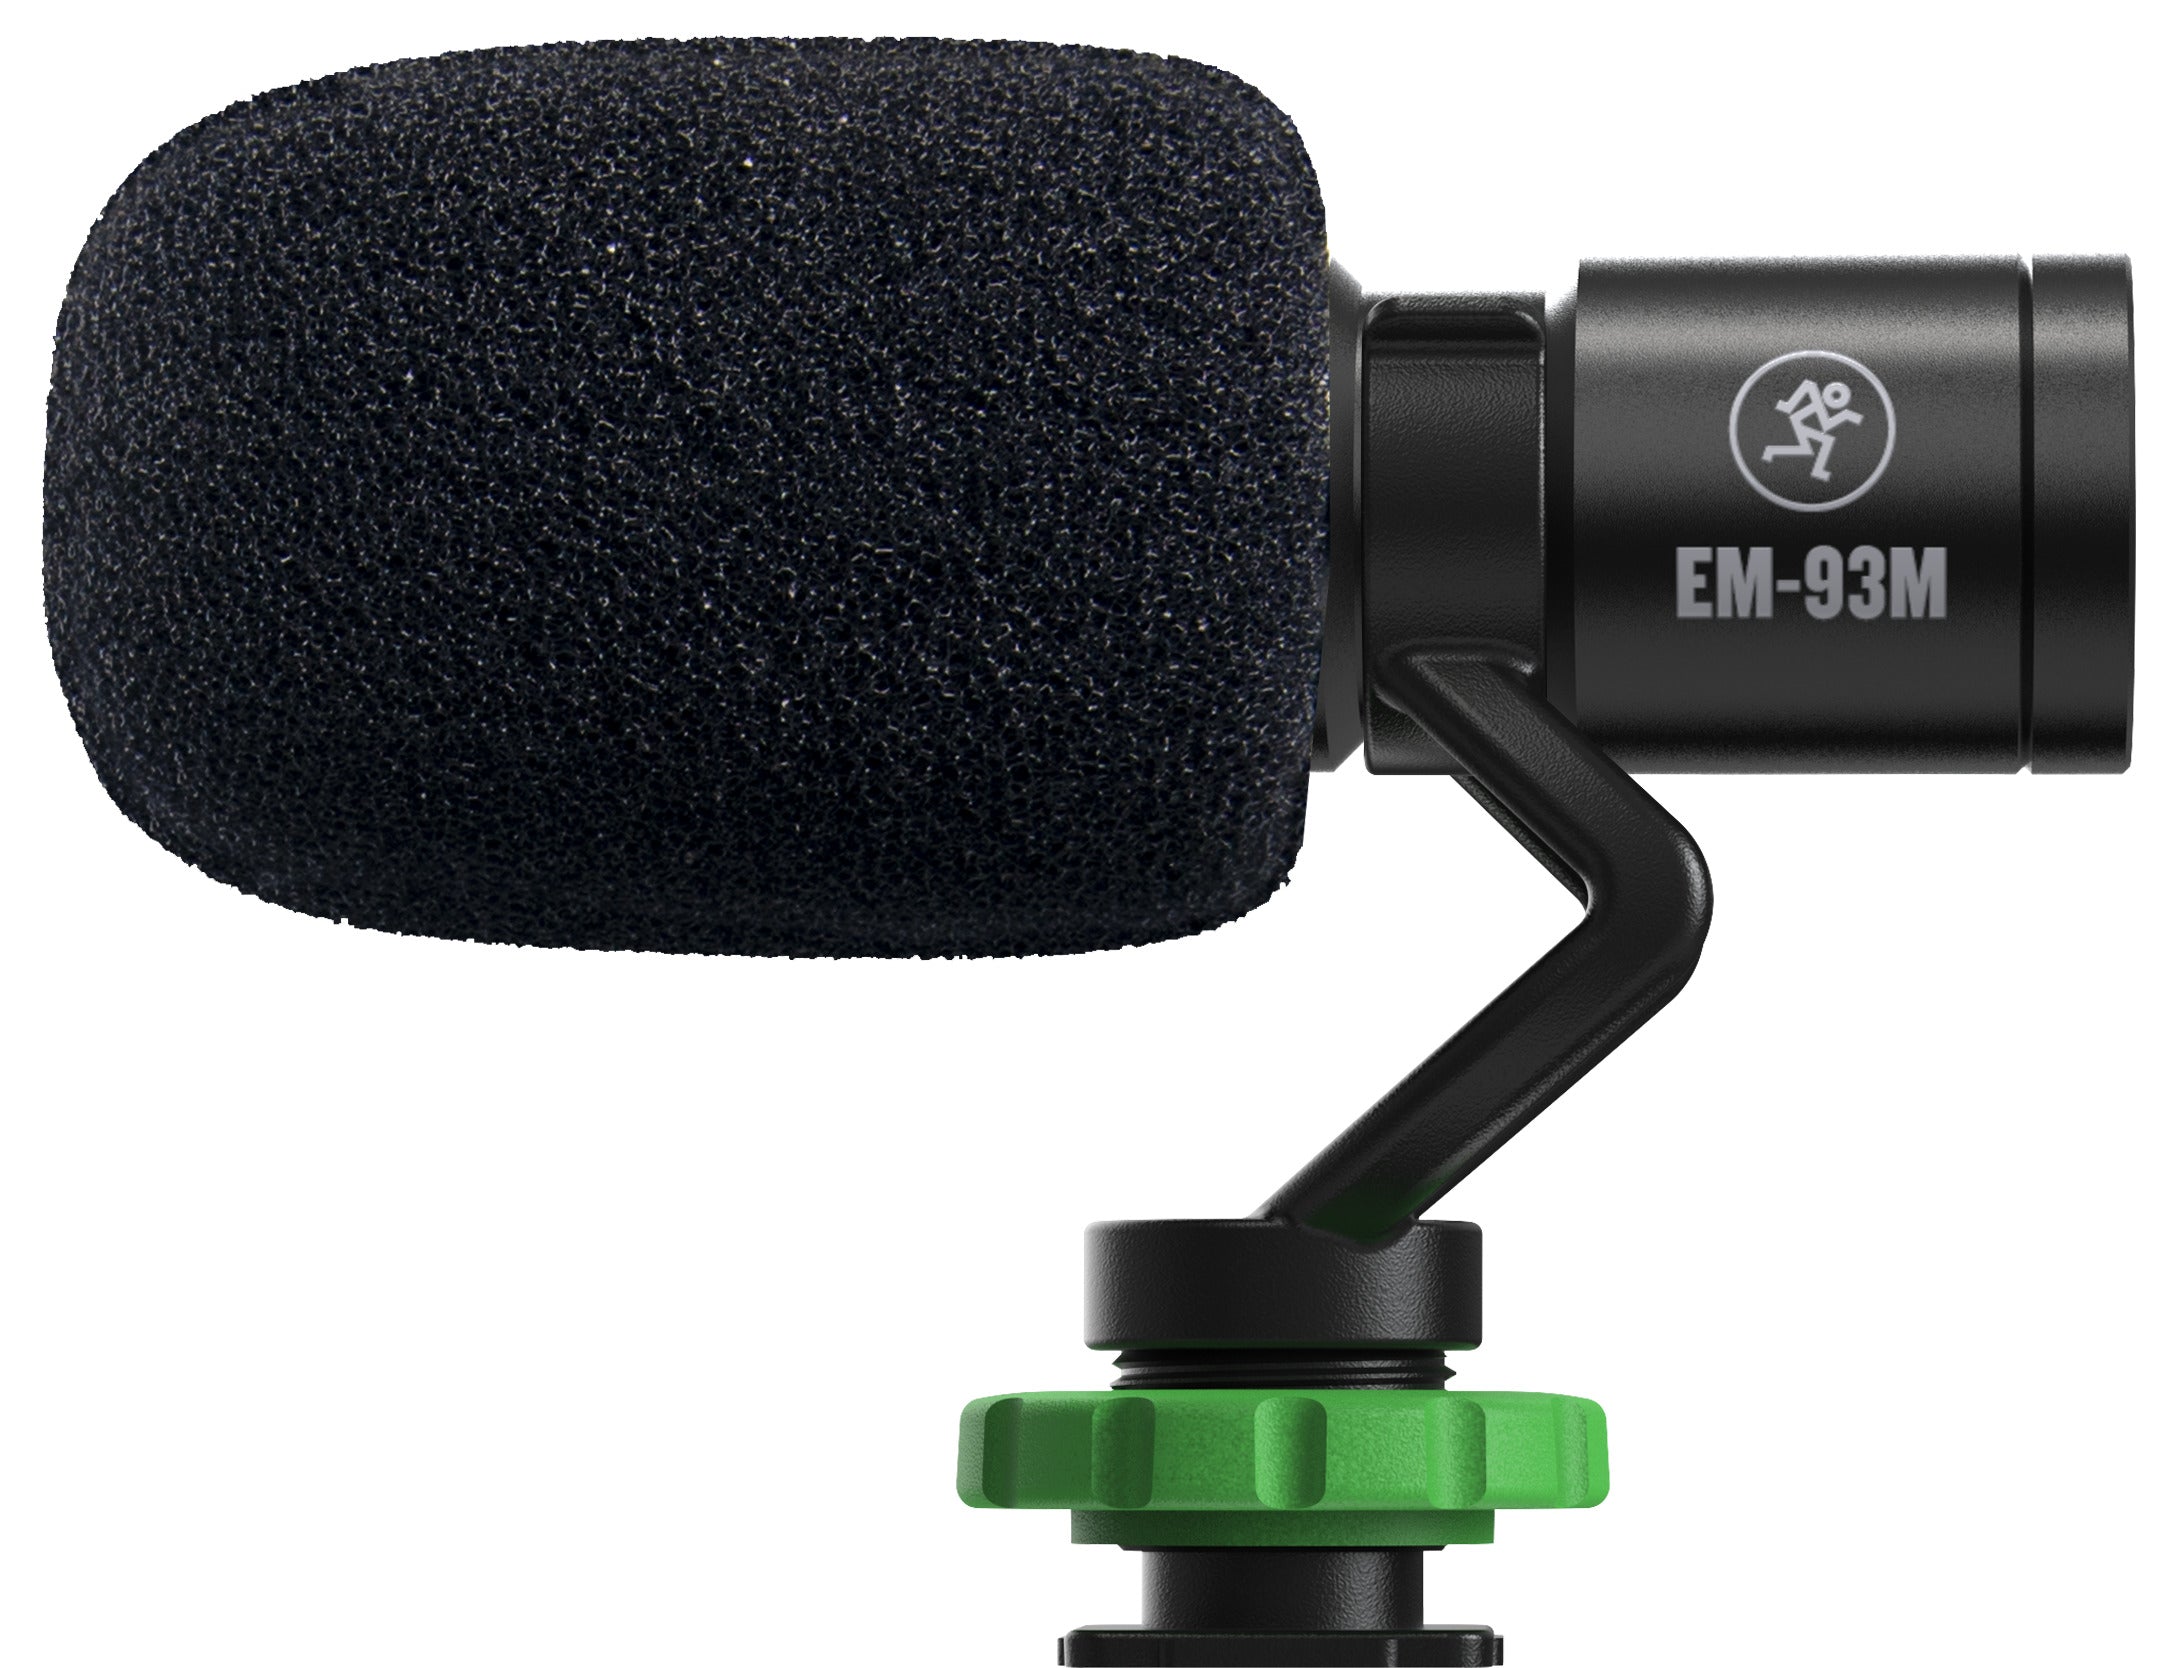 Mackie EM-93M Compact Microphone for Smartphones and DSLRS